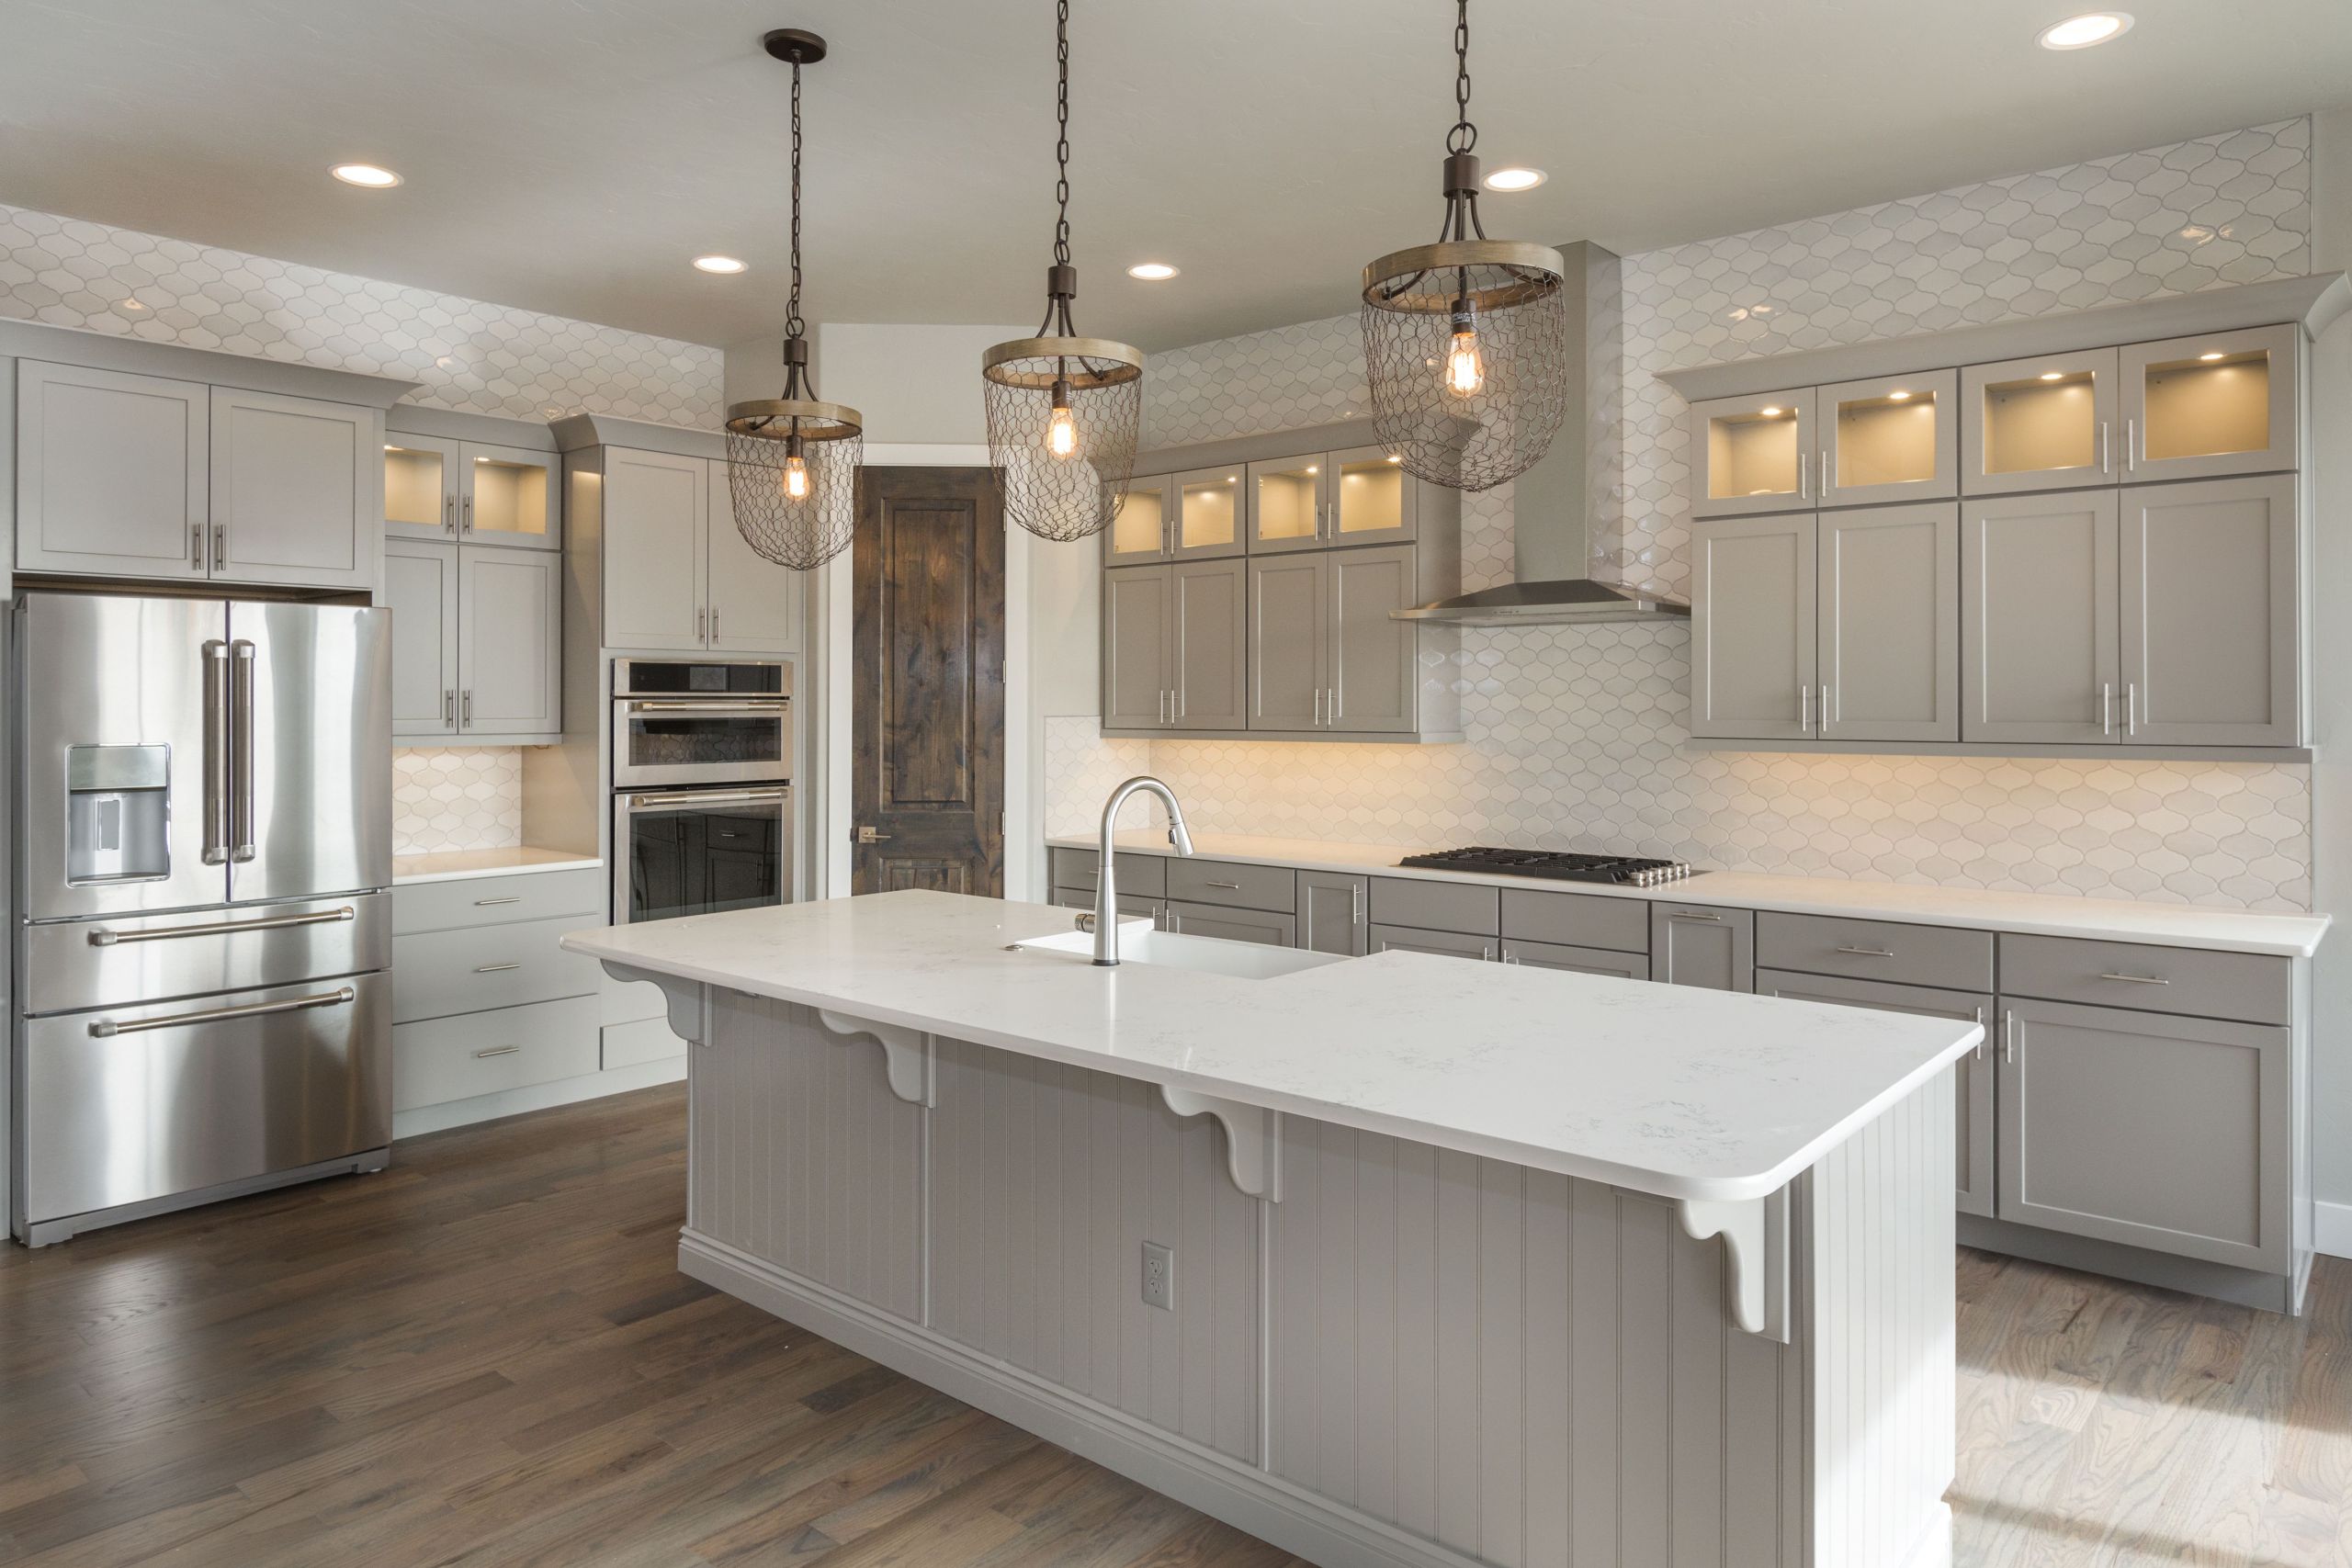 Remodel A Kitchen
 The Top Kitchen Remodeling Tips for a Stellar Kitchen